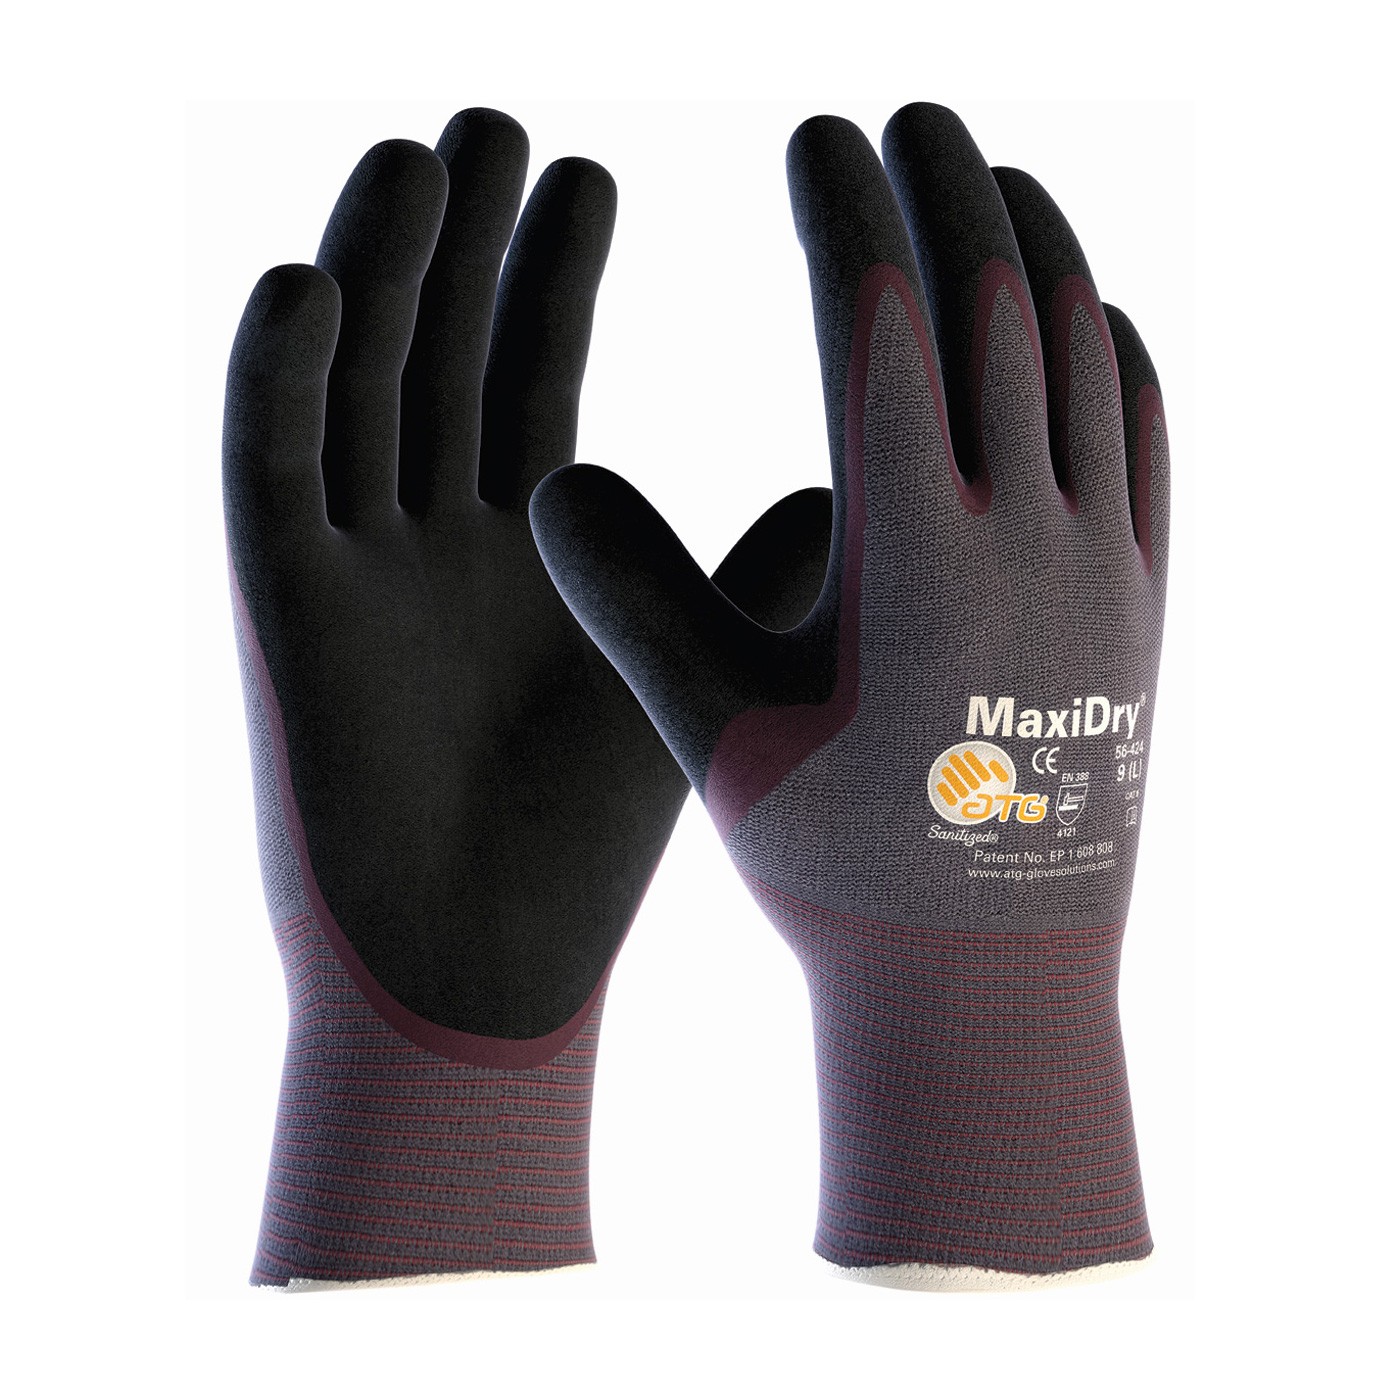 MaxiDry® Ultra Lightweight Nitrile Glove, Palm Dipped with Seamless Knit Nylon / Lycra Liner and Non-Slip Grip on Palm & Fingers (#56-424)